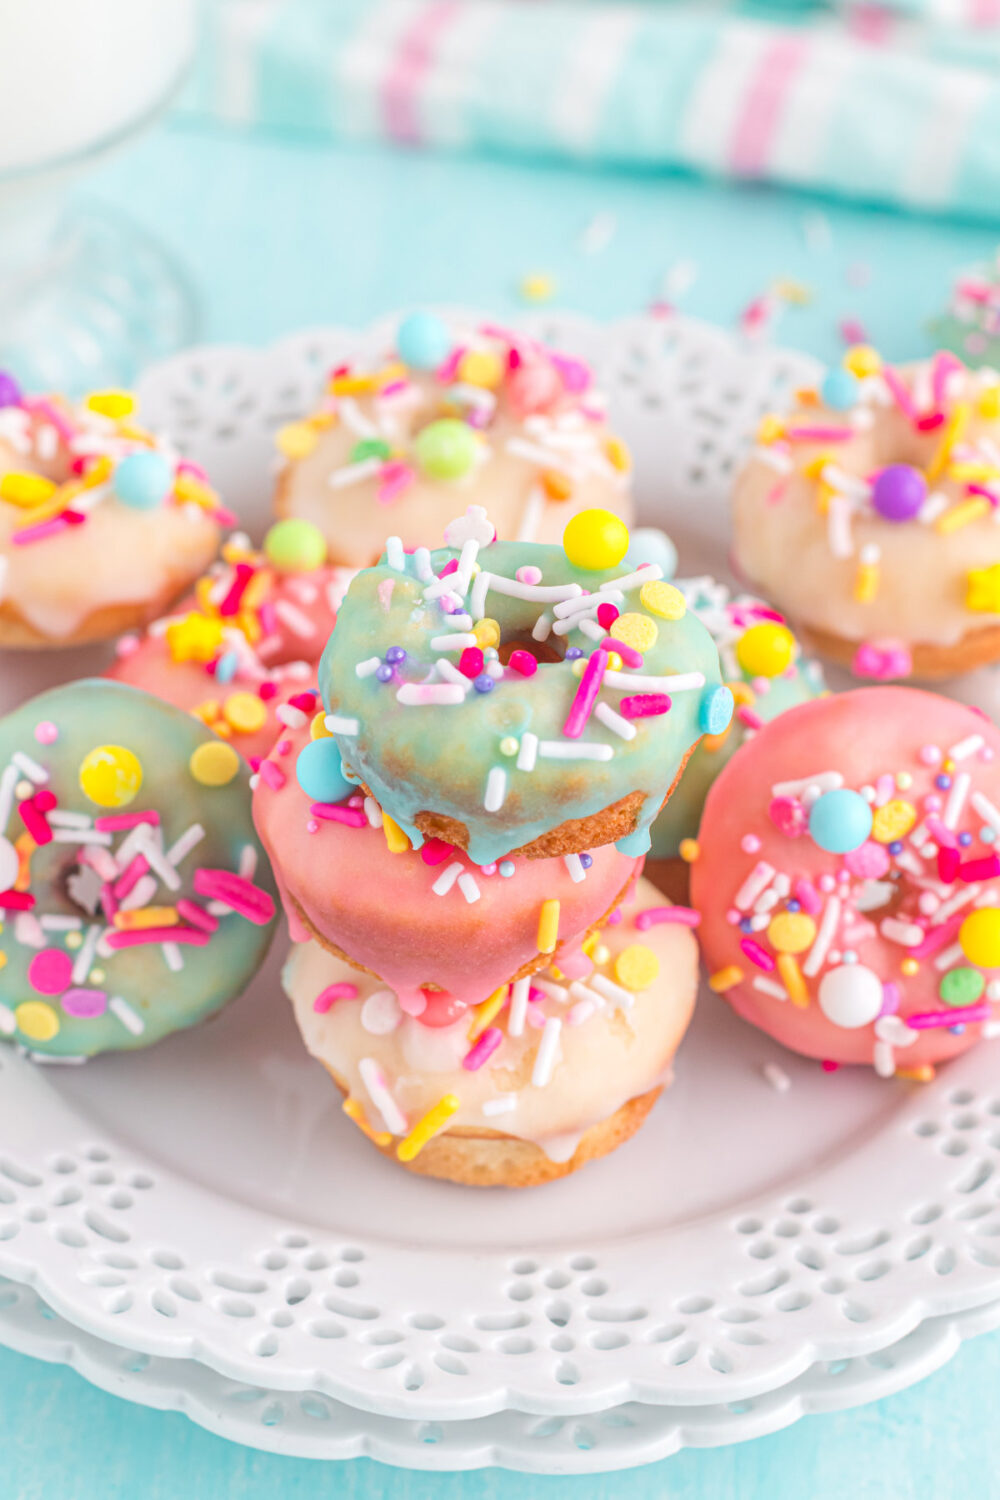 Plate full of tiny donuts with blue, yellow, and pink glaze and sprinkles. 